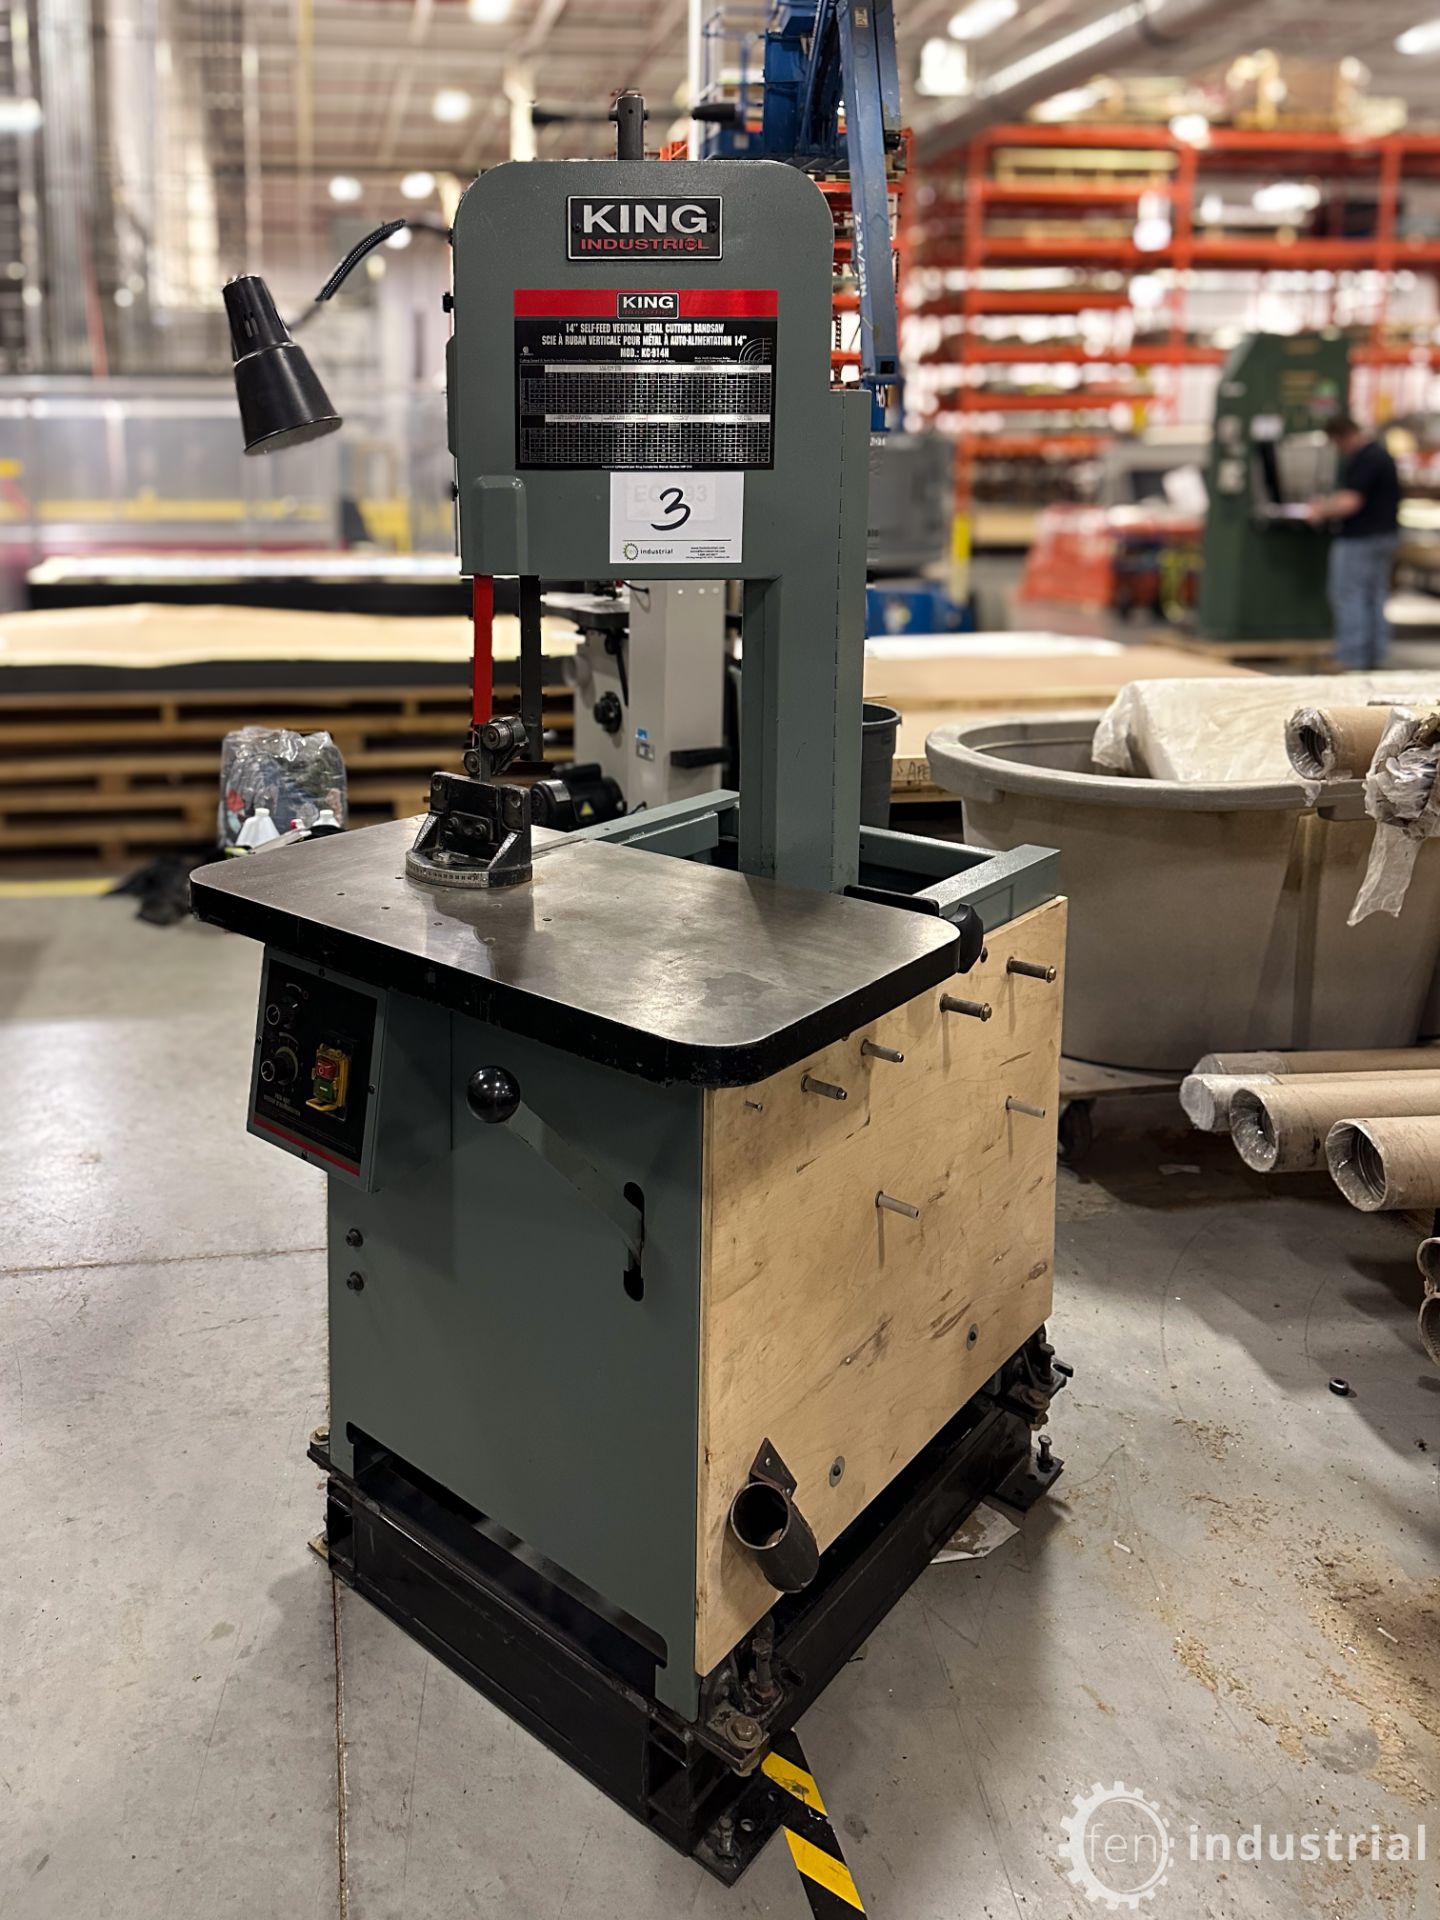 2011 KING INDUSTRIAL KC-914H 14” SELF-FEED / ROLL-IN VERTICAL METAL CUTTING BANDSAW, 1,725 RPM,